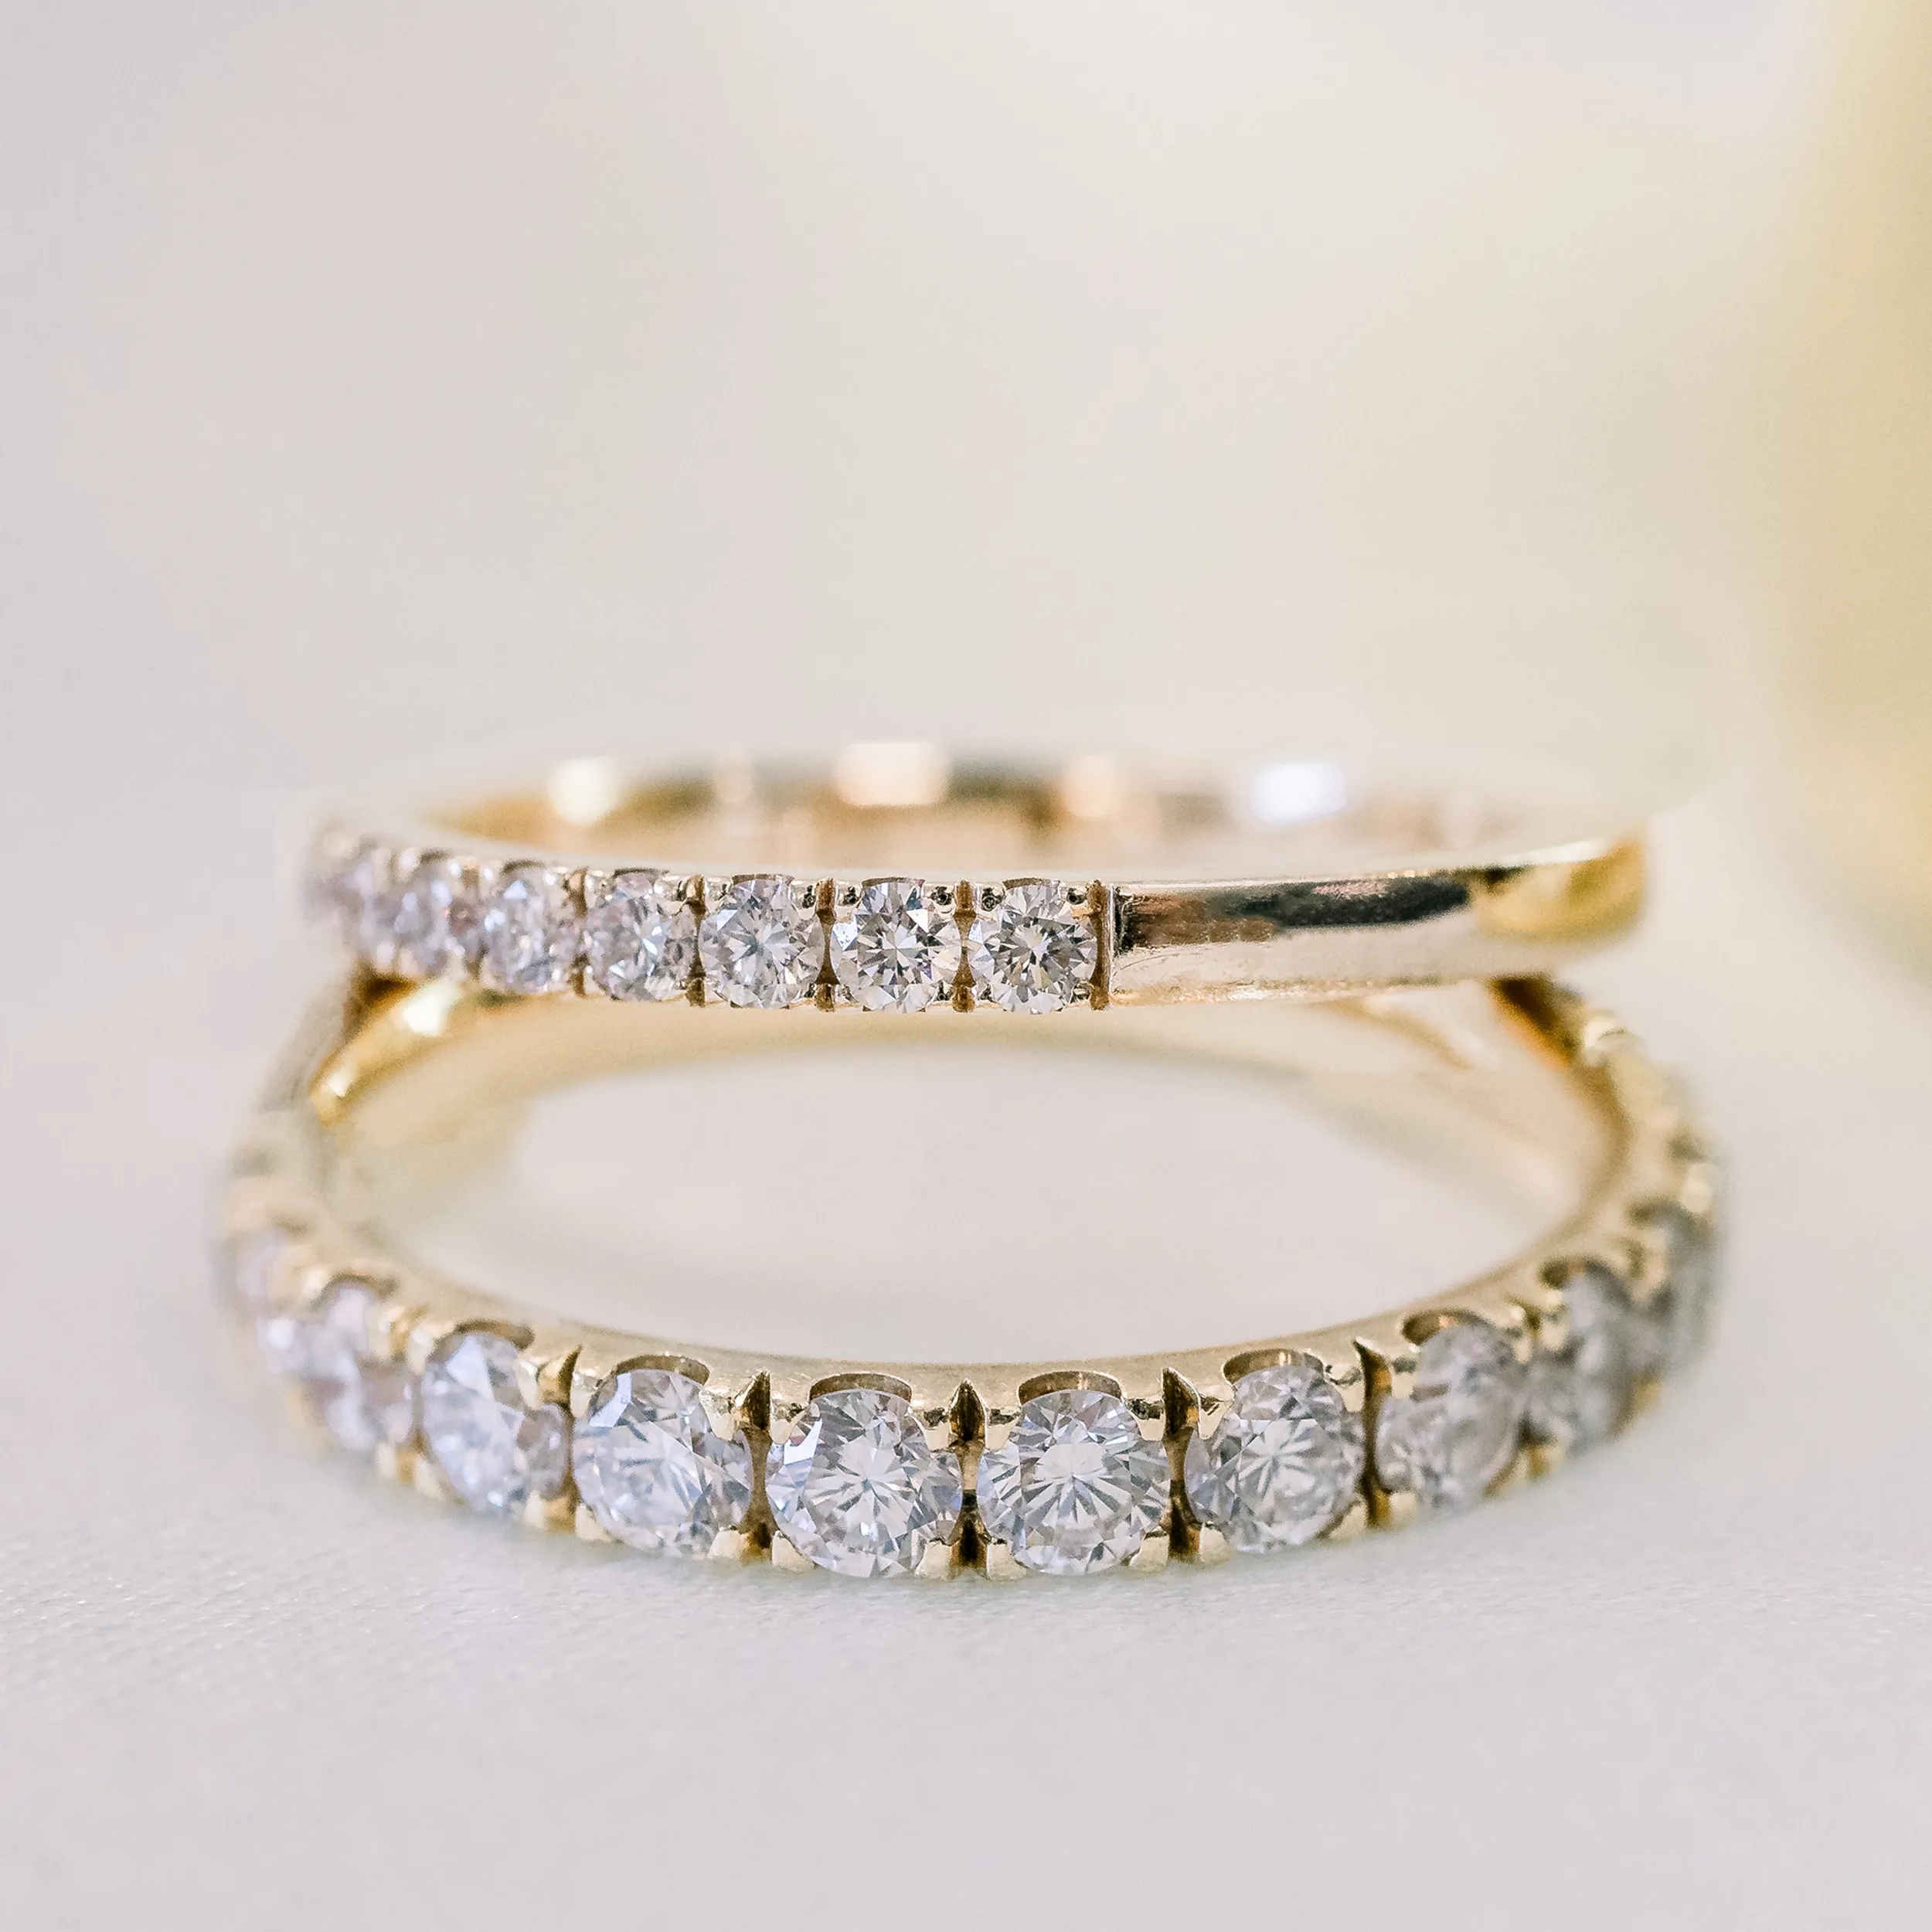 French U Round Eternity Band featuring High Quality Lab Diamonds (Profile View)